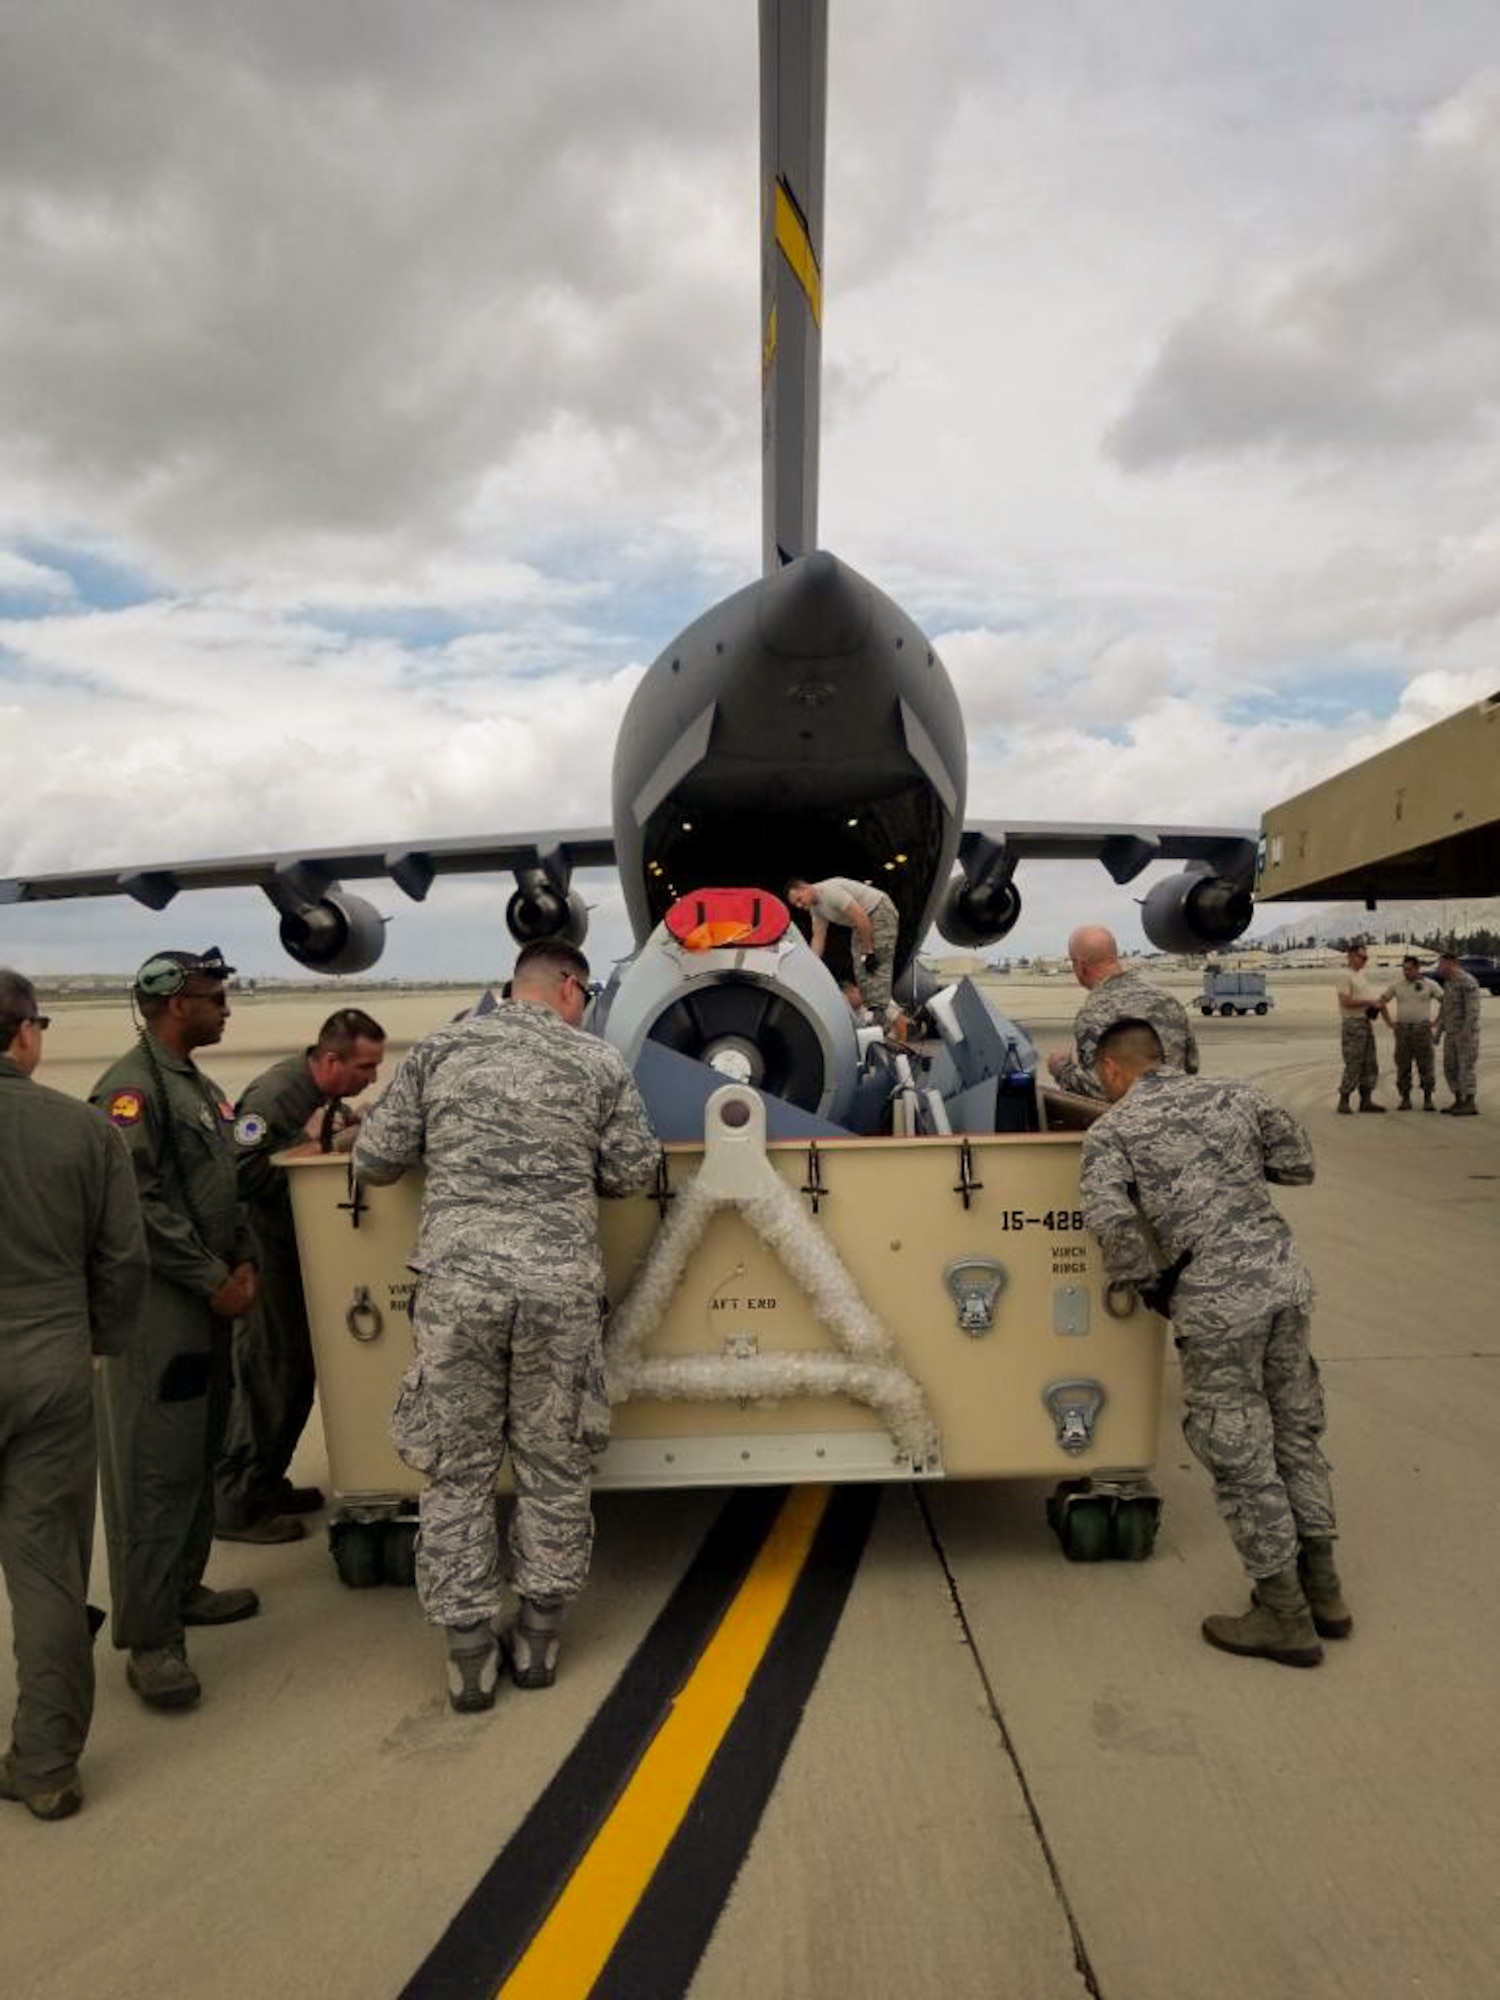 MARCH AIR RESERVE BASE, Calif. (April 14, 2019) - Airmen from the 452nd & 163rd Maintenance Squadrons here exhibited one of March’s MQ-9 Reapers and C-17 Globemaster IIIs at the Langkawi International Maritime and Aerospace Exhibition Tuesday March 26 through Saturday March 30 in Langkawi, Malaysia.